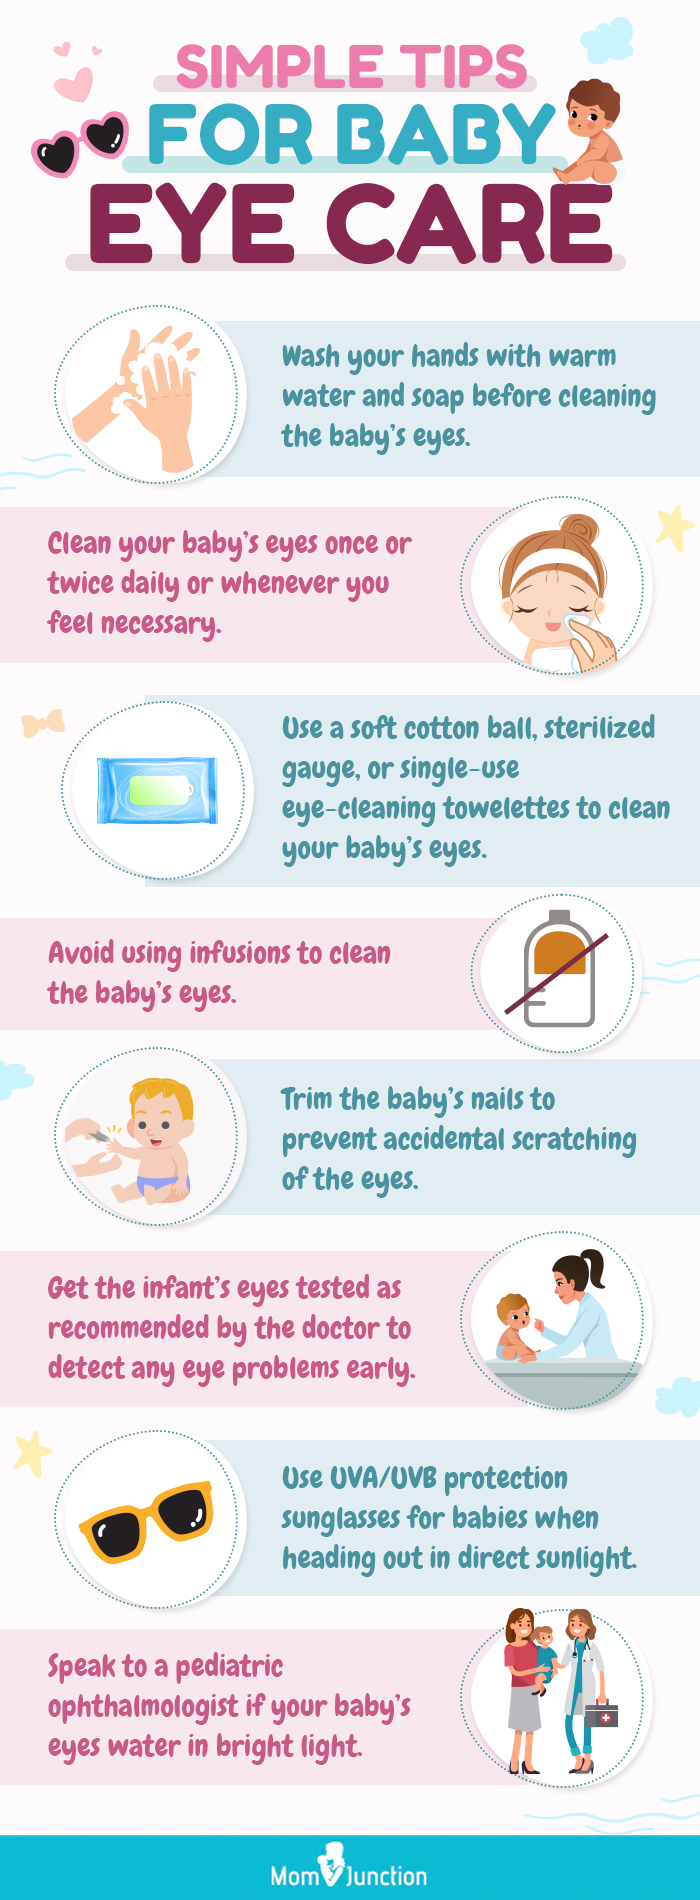 simple tips for baby eye care [infographic]